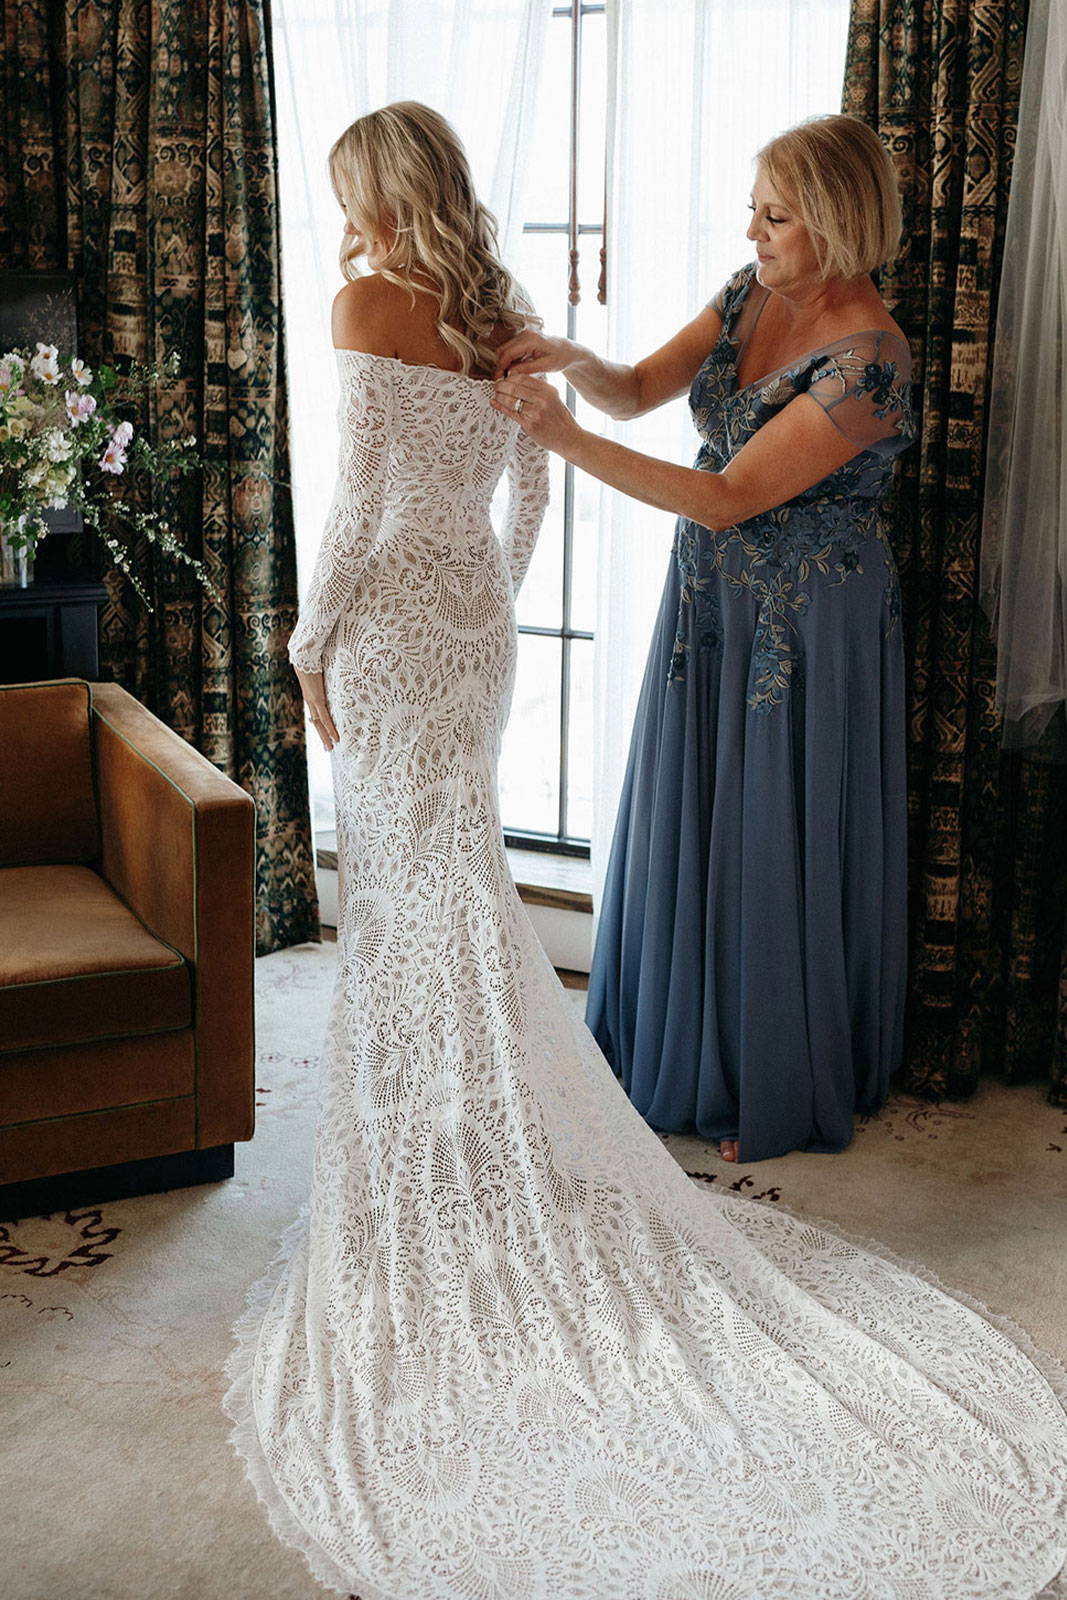 Mother of the Bride helping Bride button the Nathalia gown